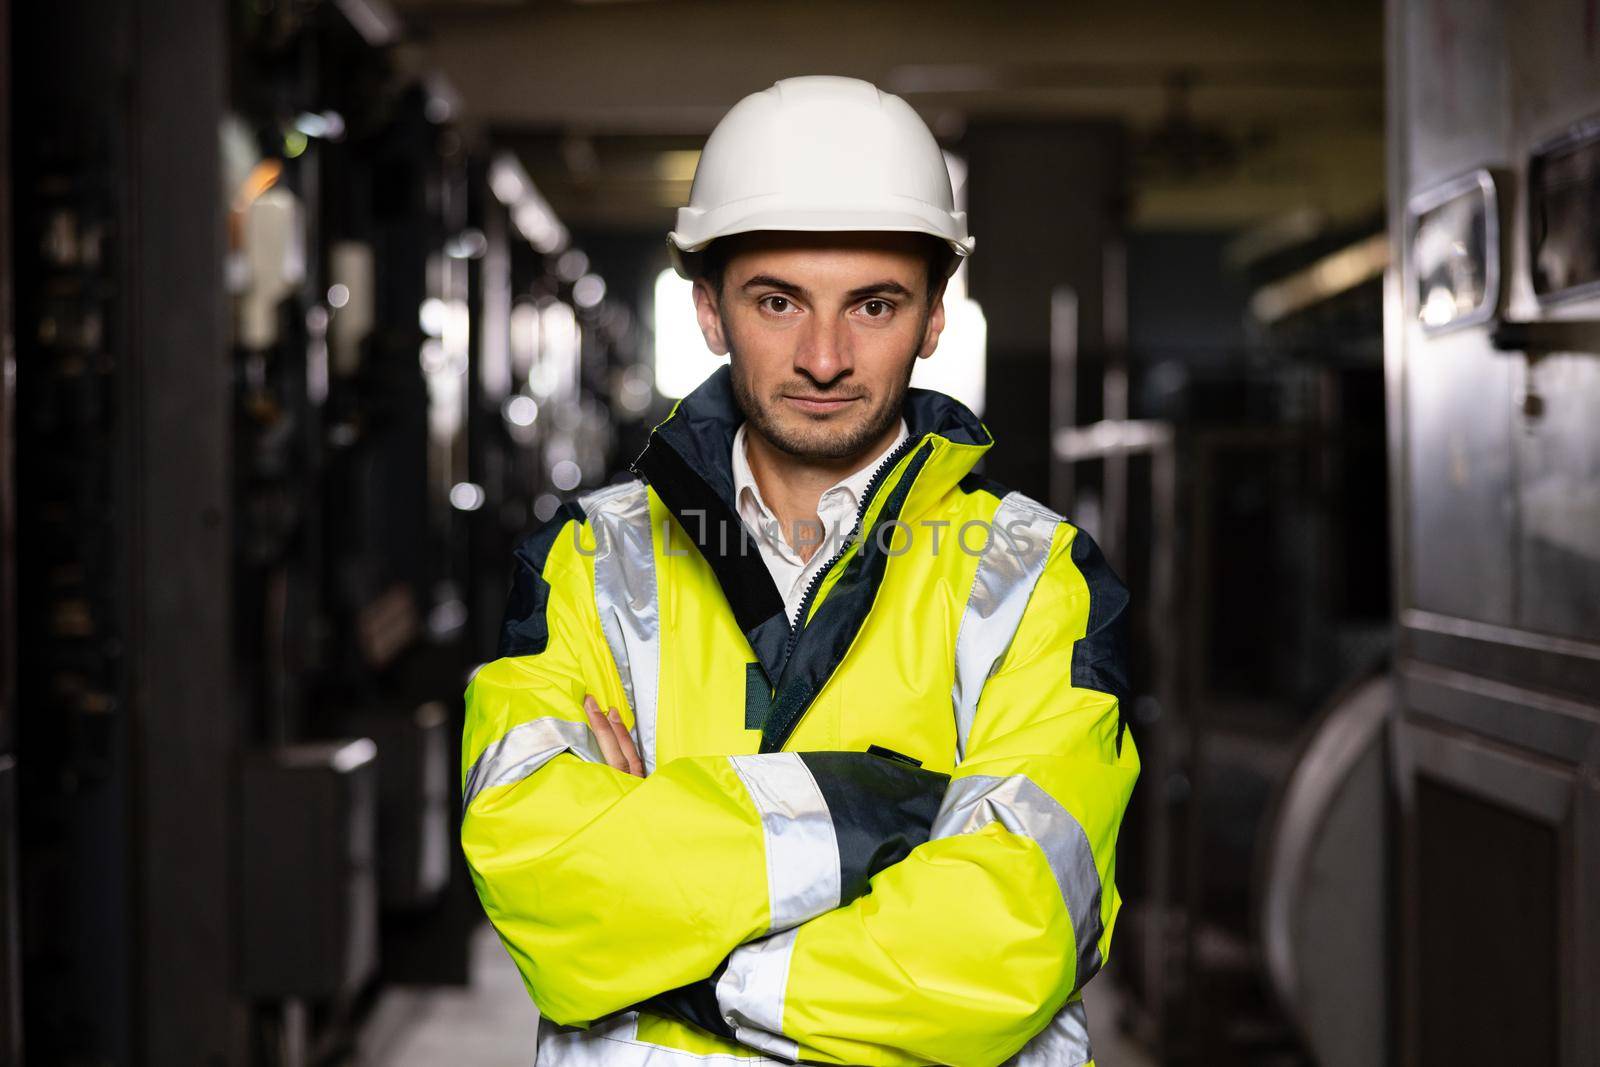 Young factory engineer or worker wearing safety vest and hard hat crossing arms at electrical control room. Industry and engineering concept by uflypro